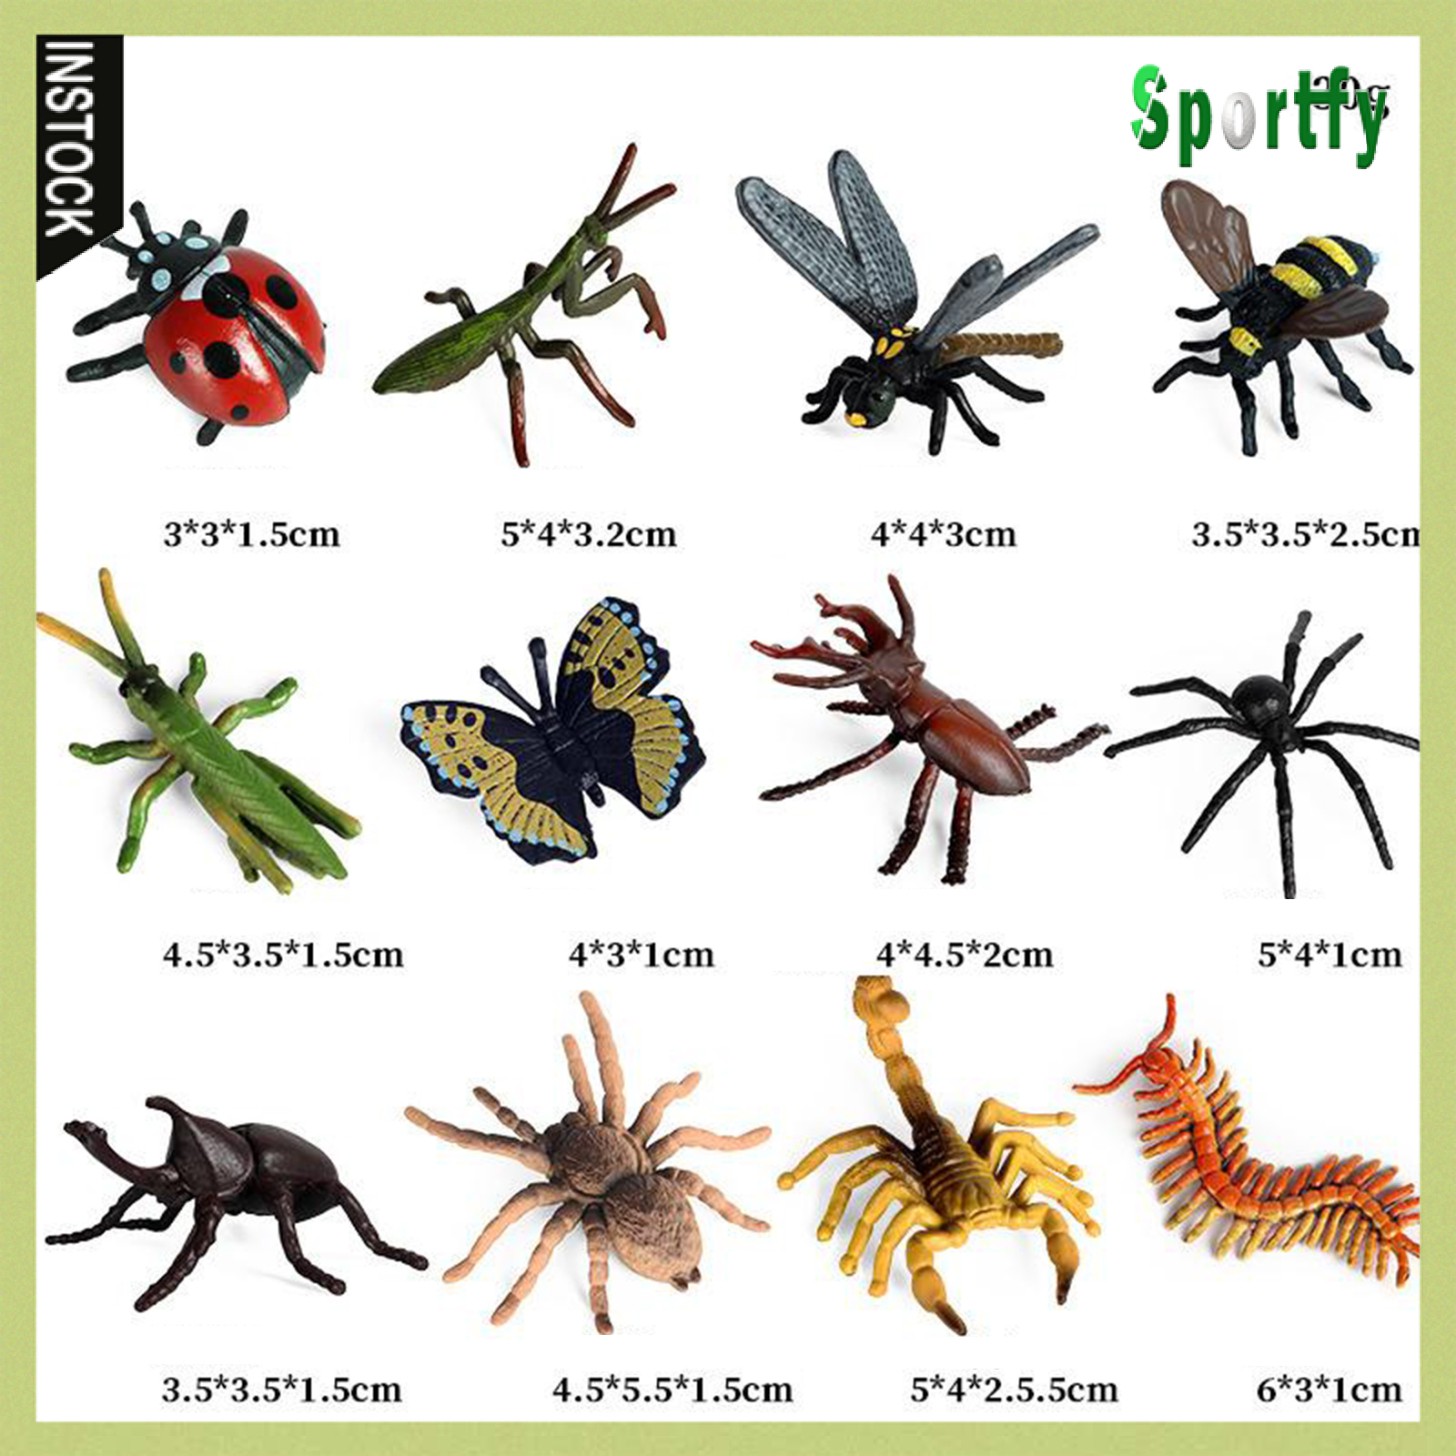 12pcs Insects Bugs Spider Scorpion Bee PVC Plastic Toy Figures Model